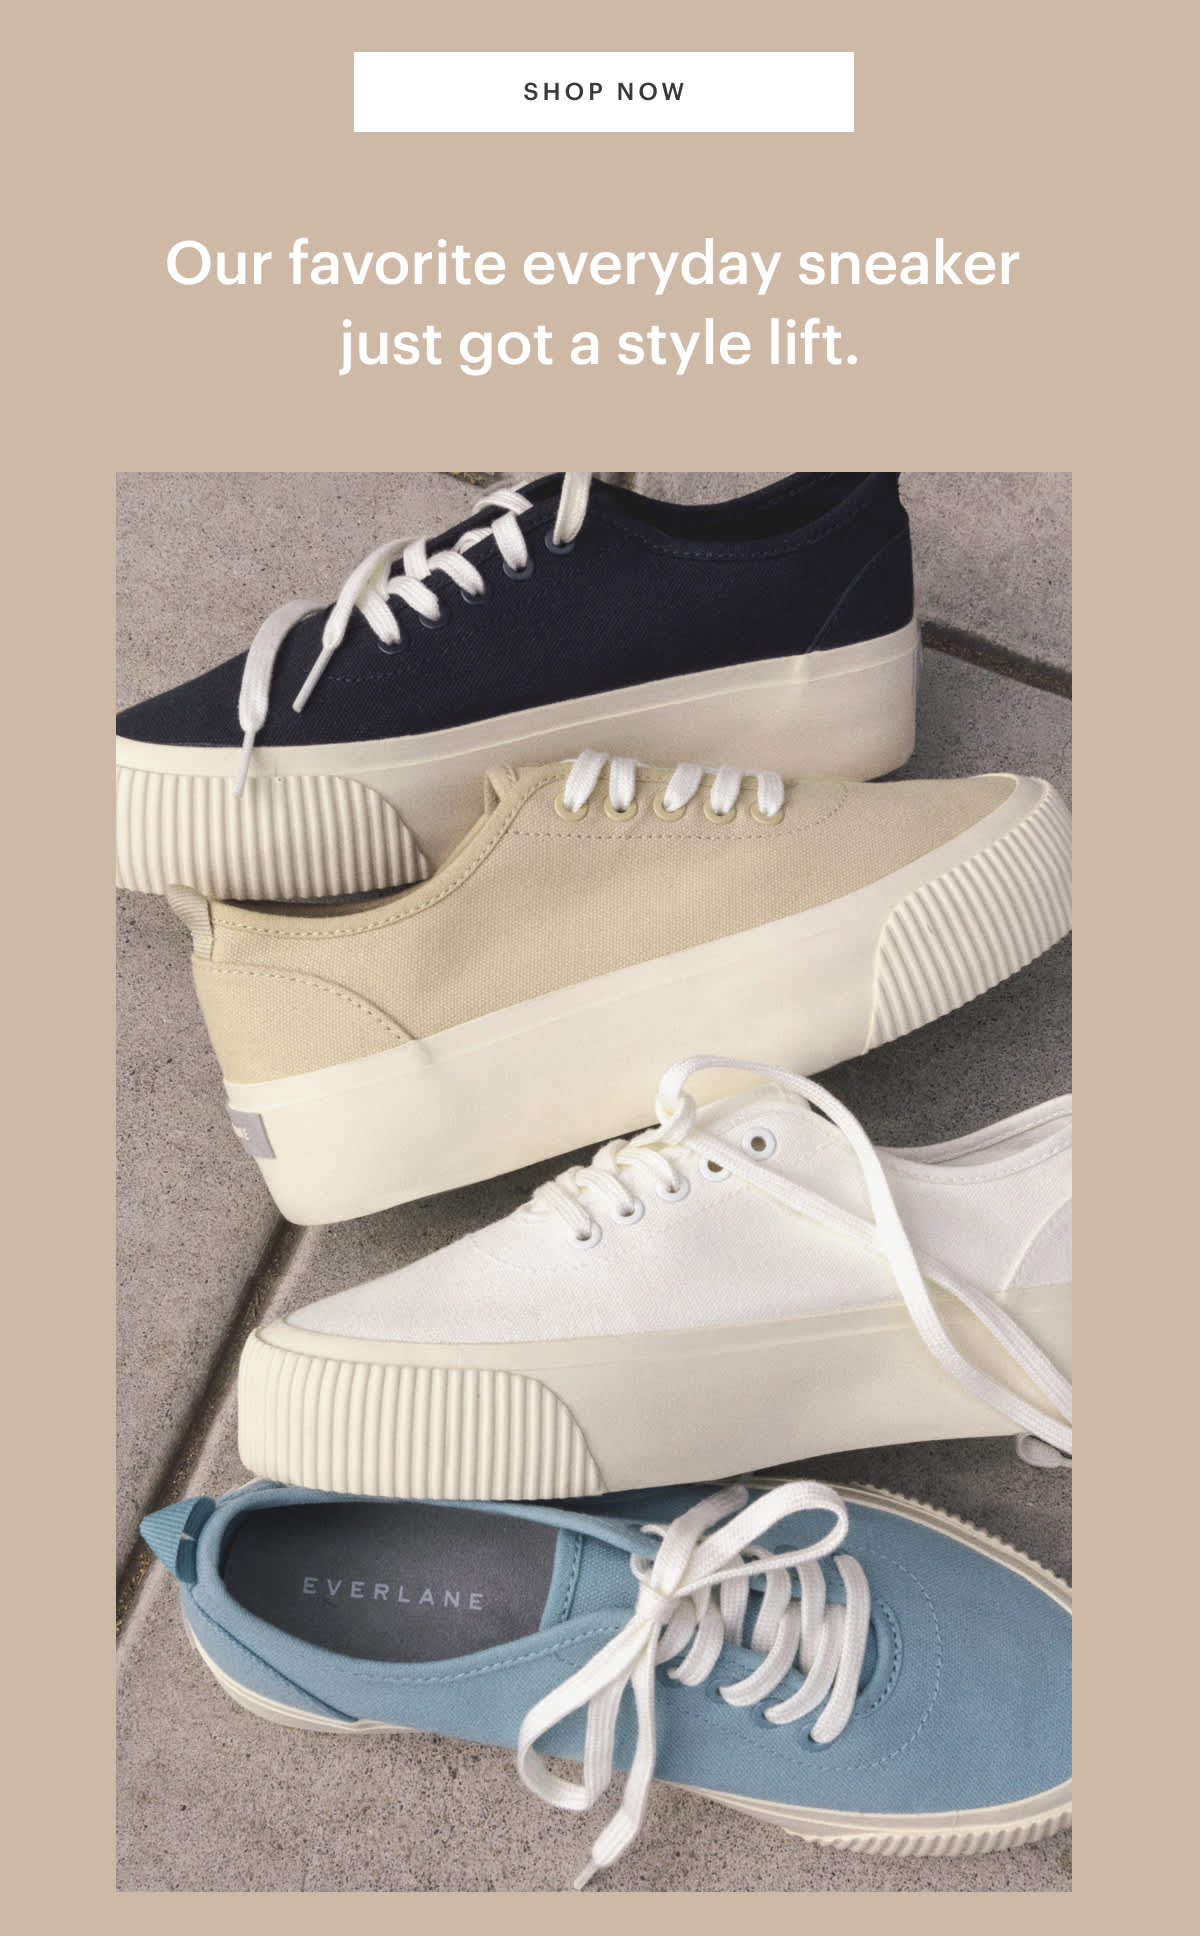 Our favorite everyday sneaker just got a style lift.